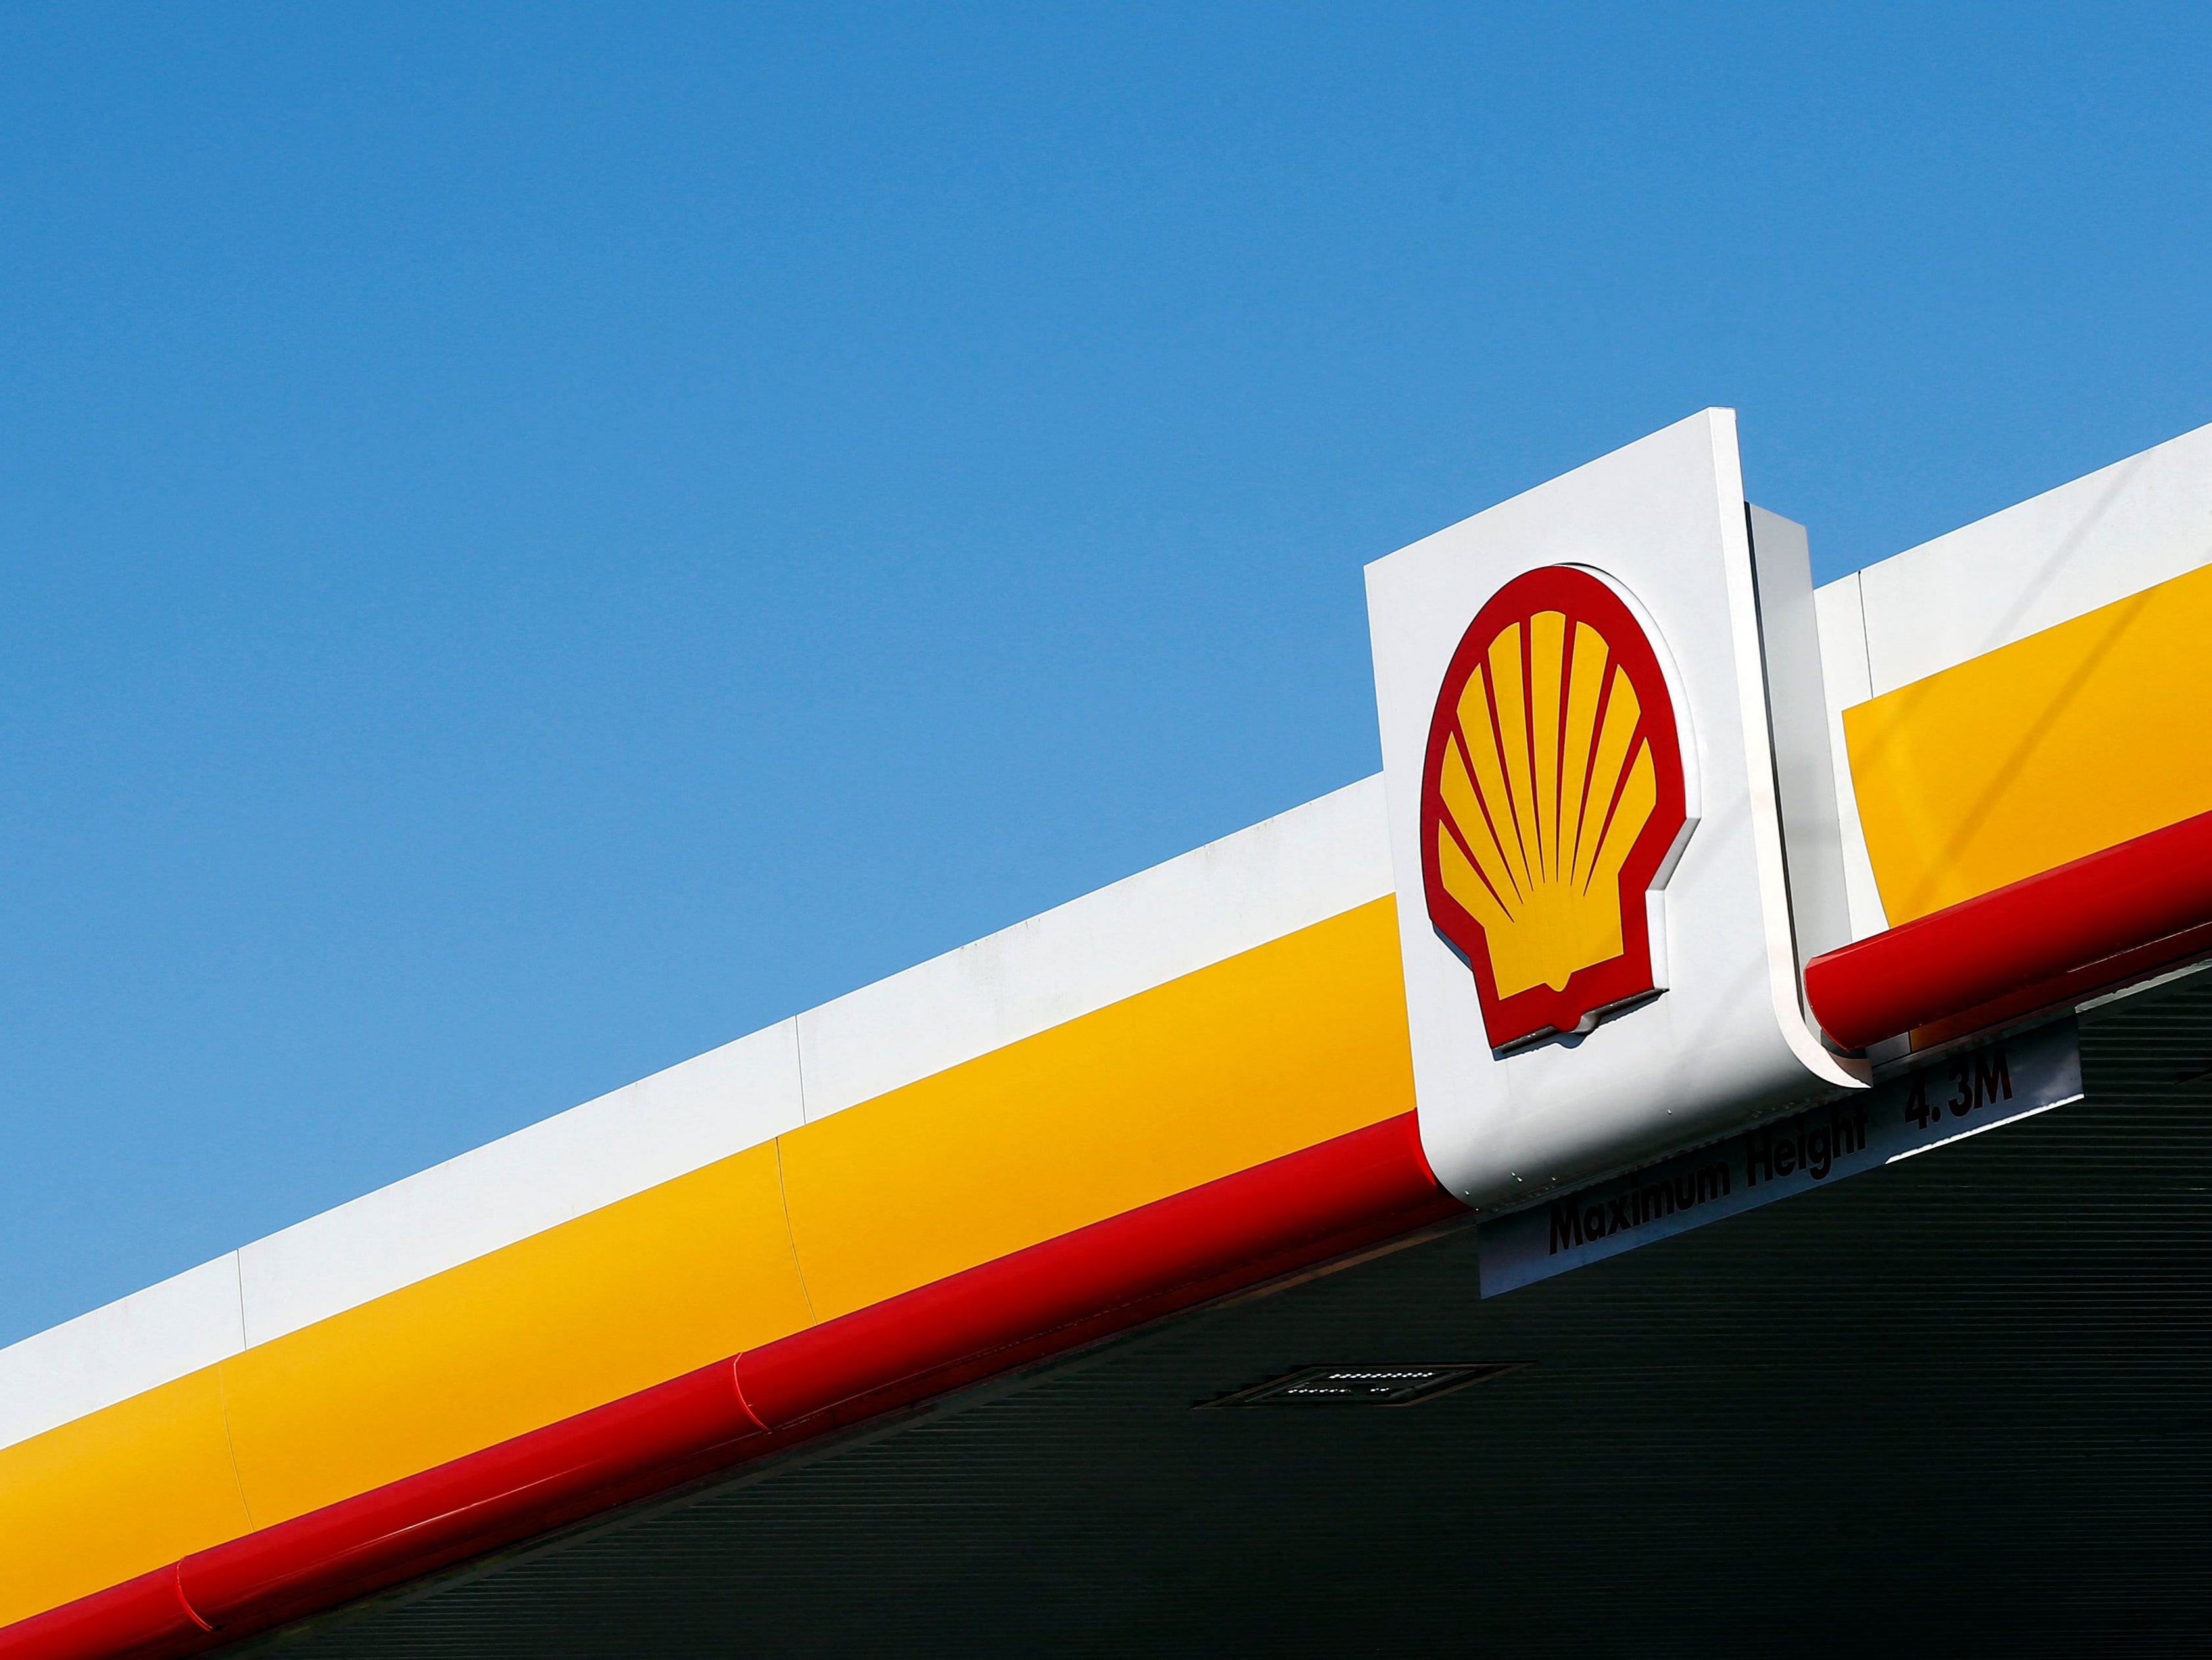 A Dutch court has ruled that Shell must reduce its CO2 emissions by 45 per cent within 10 years